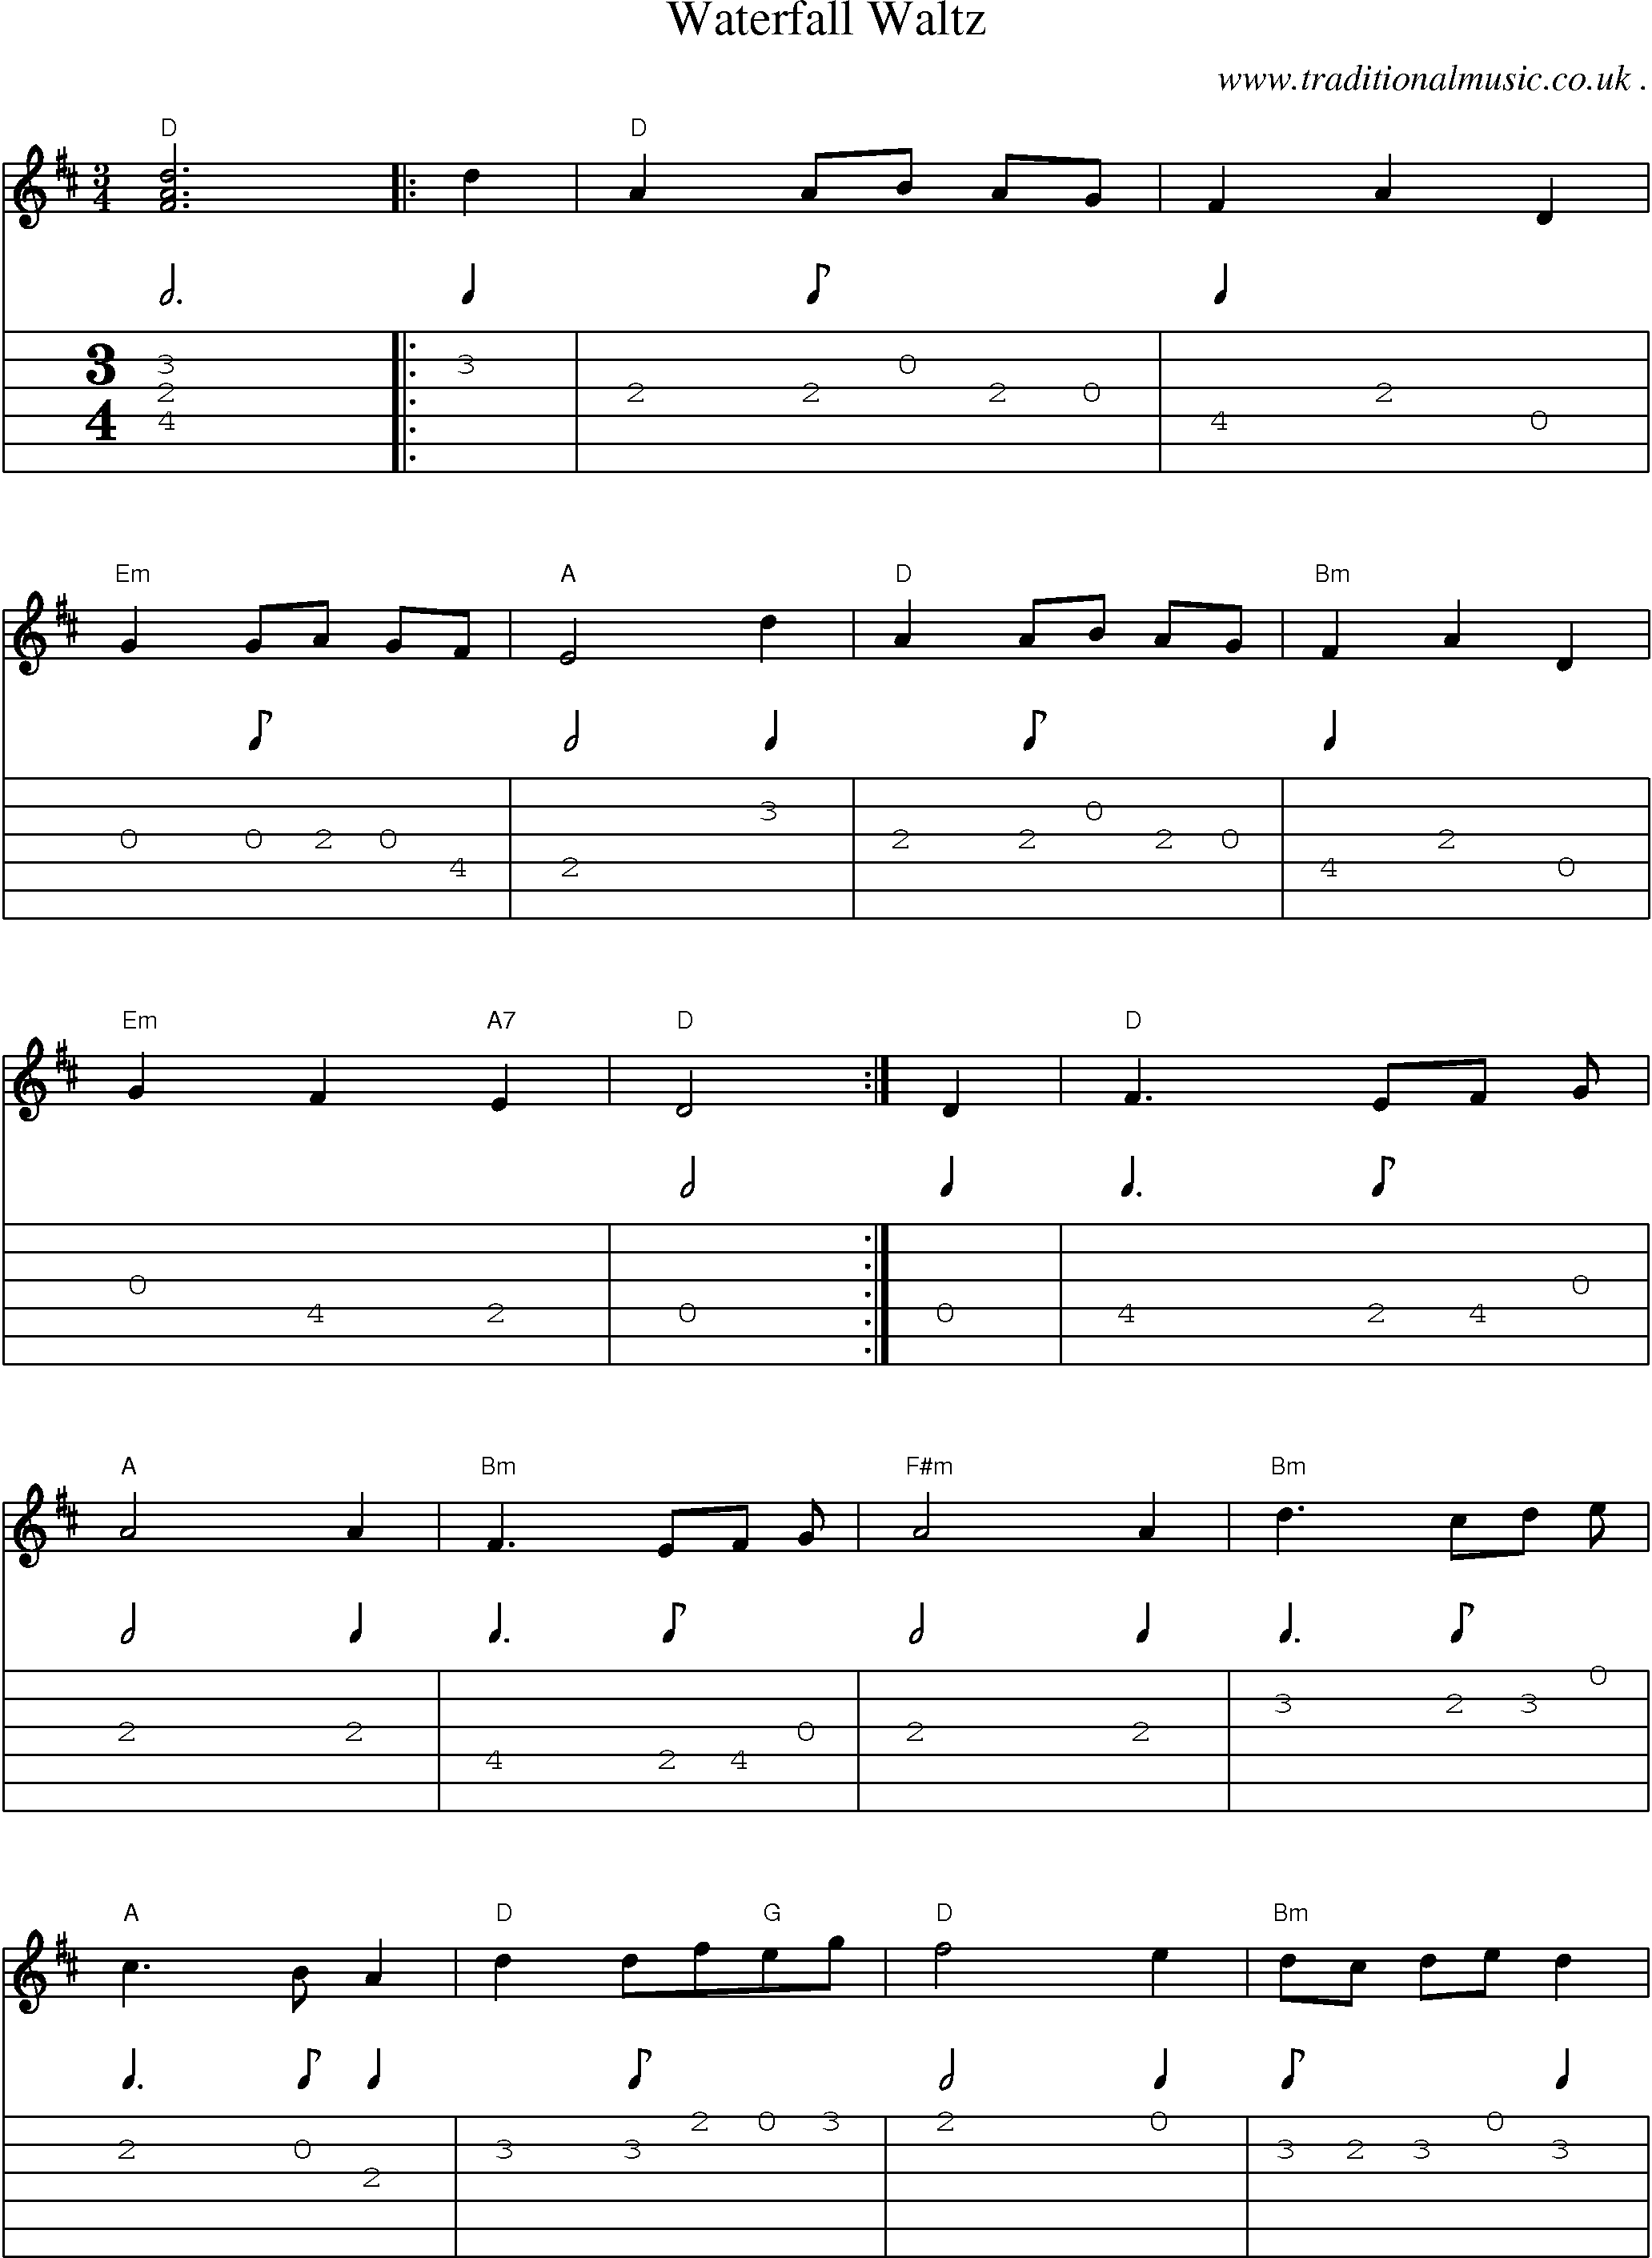 Sheet-Music and Guitar Tabs for Waterfall Waltz